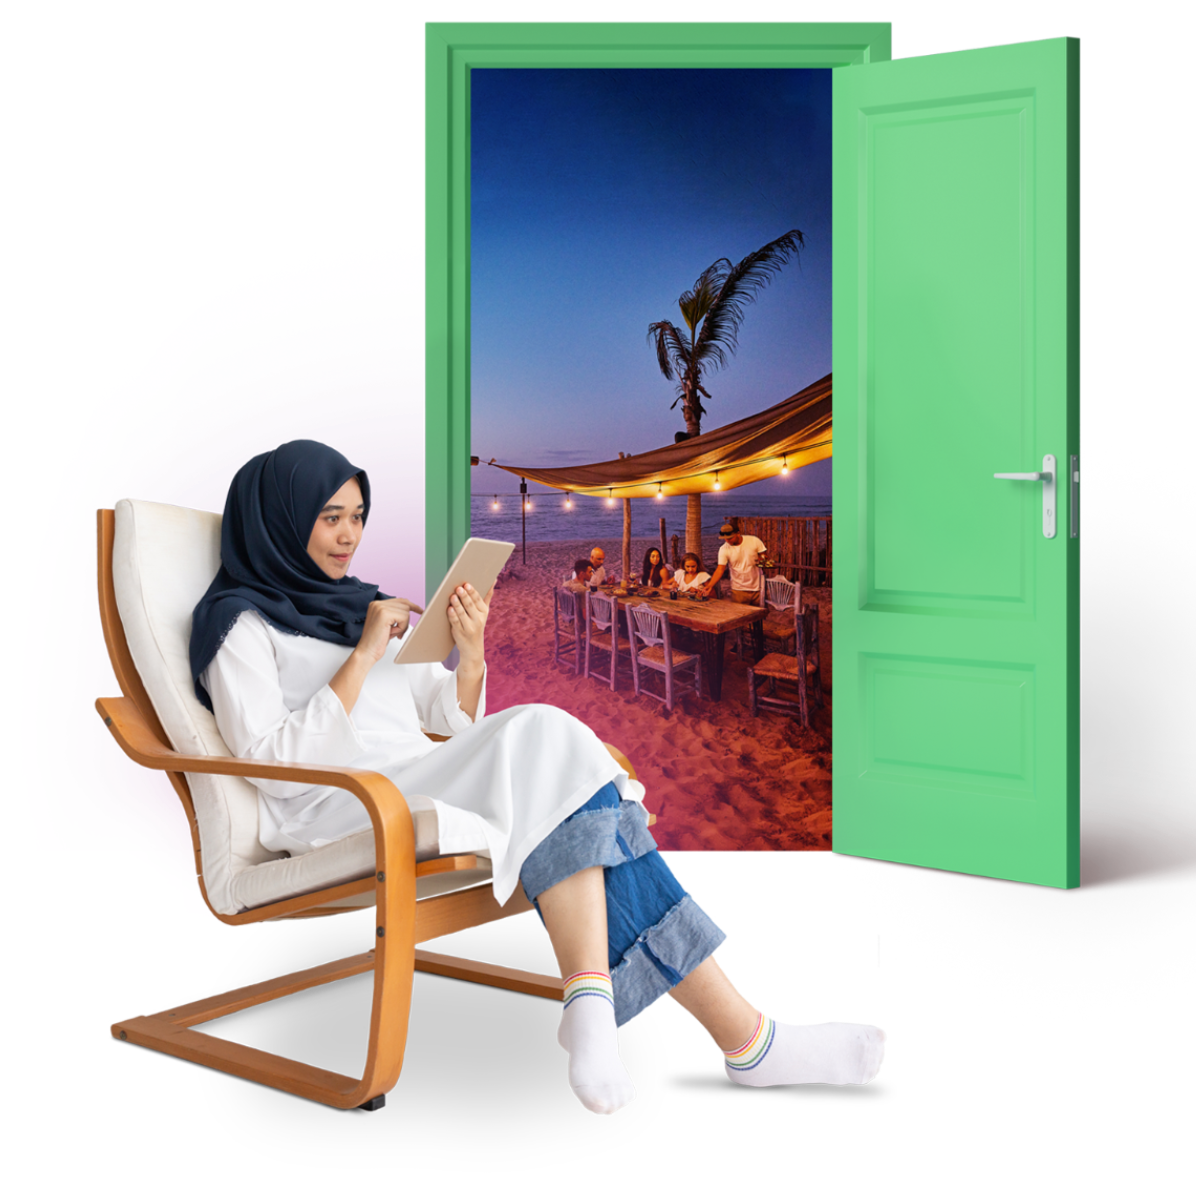 Woman relaxing on a chair with an electronic tablet, seated in front of a bright green, open door with a vision inside the door of her and her family enjoying dinner on a beach.